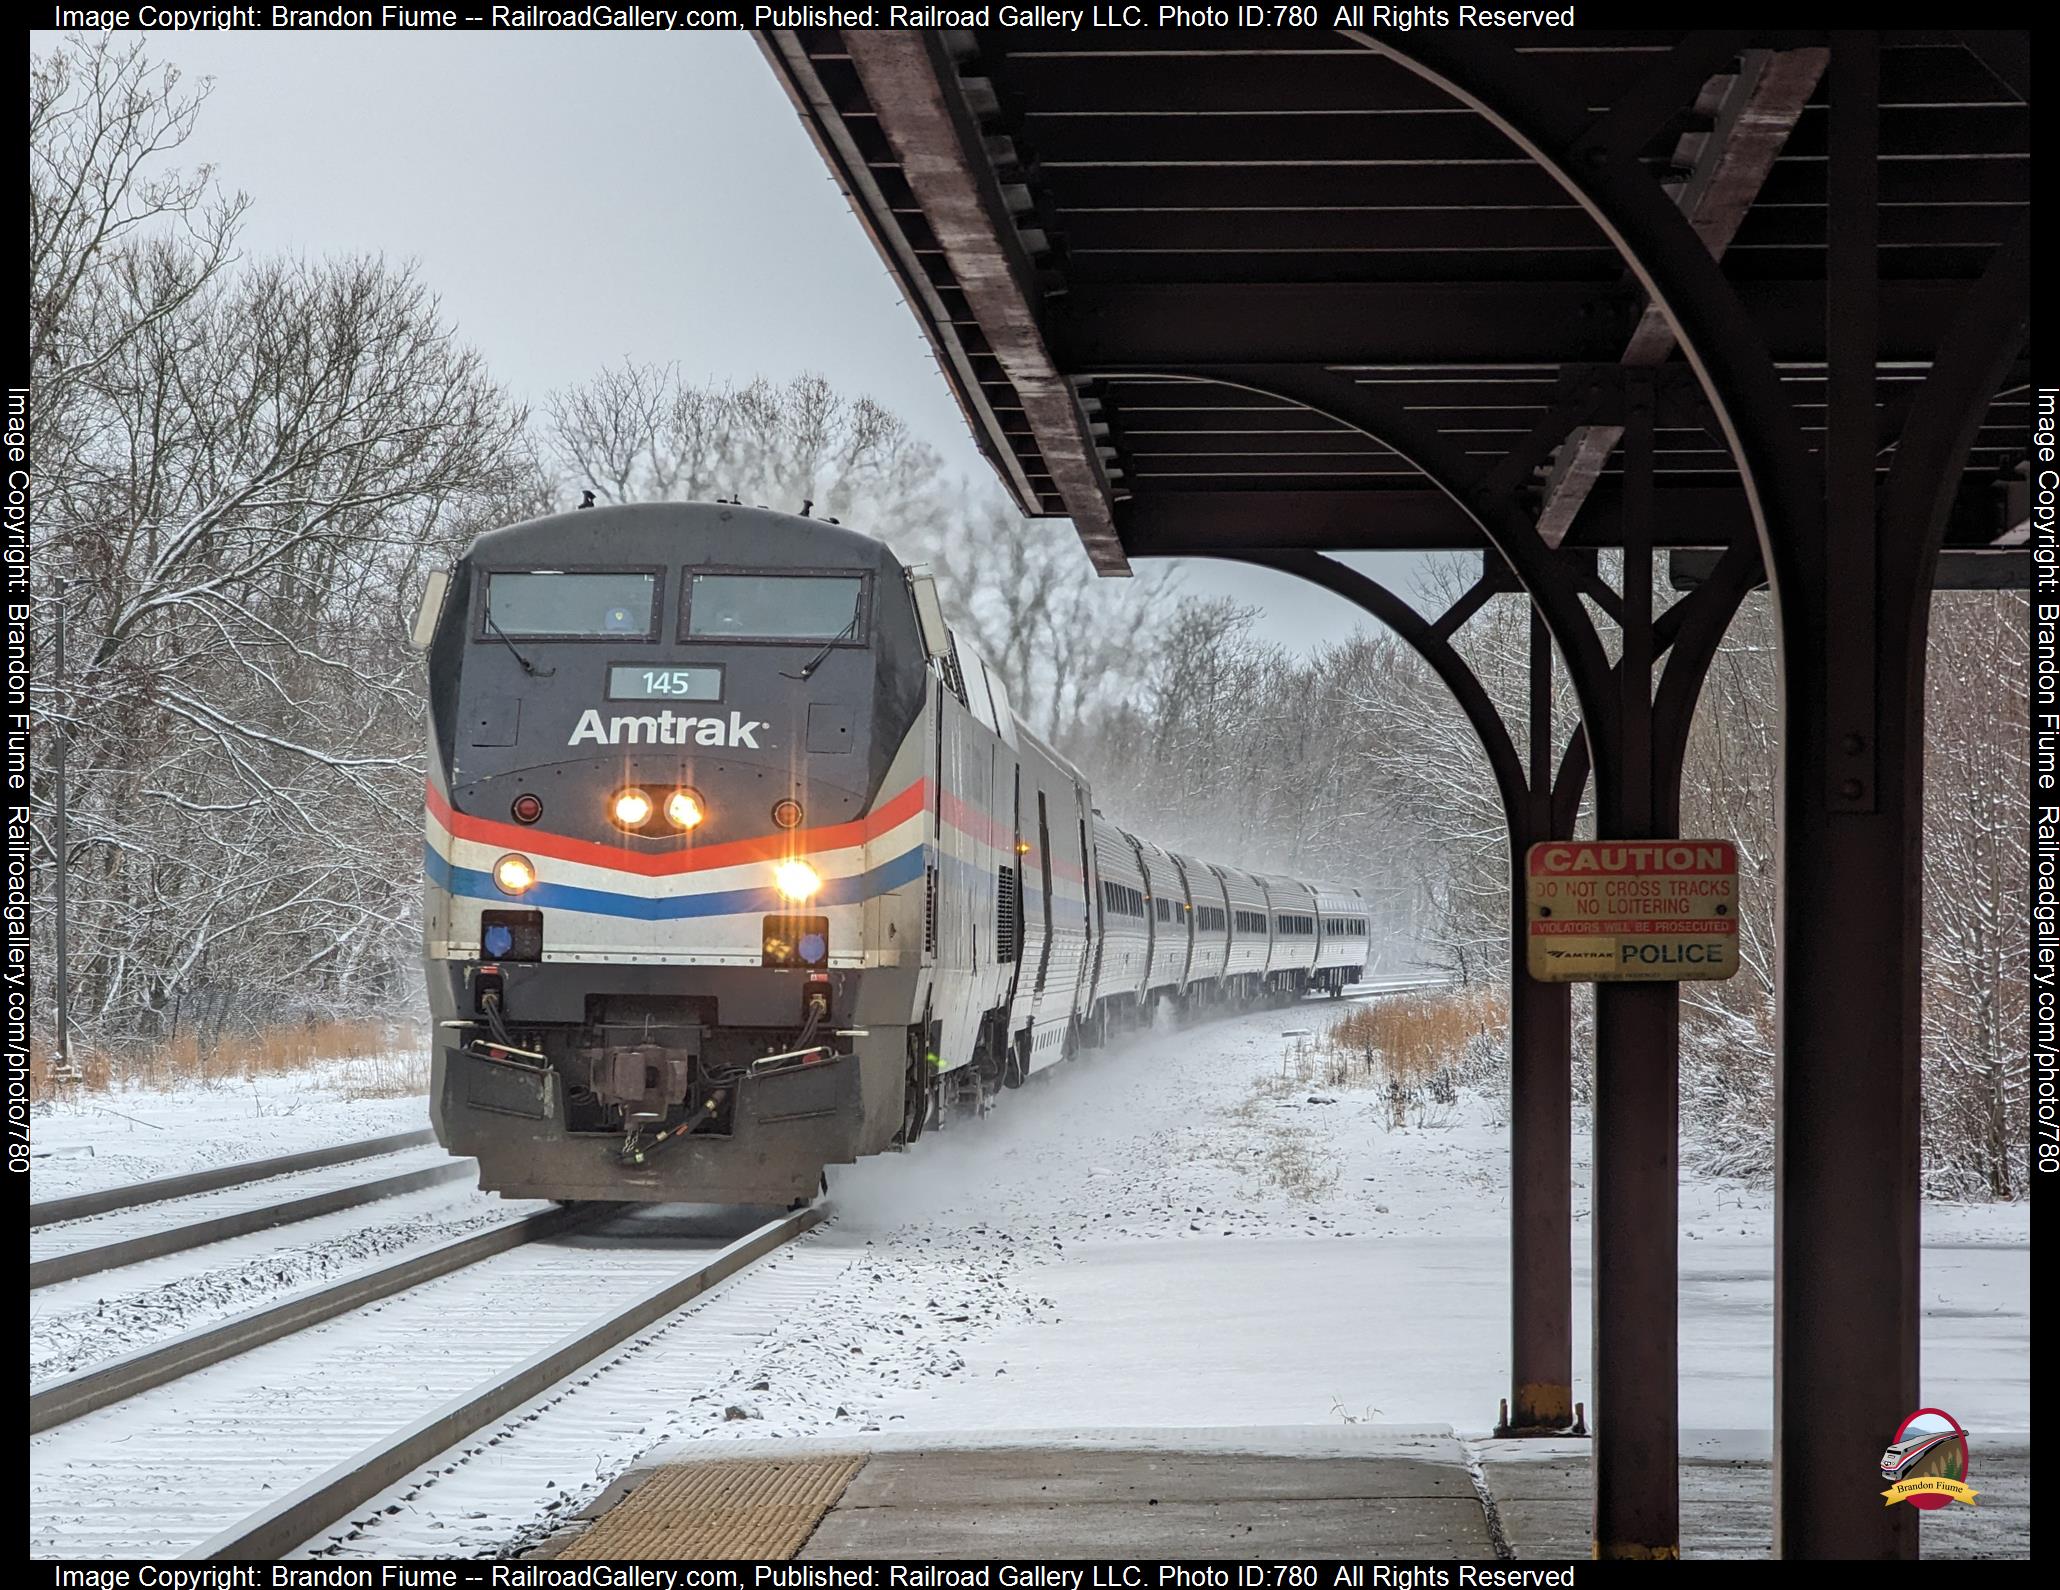 AMTK 145 is a class GE P42DC and  is pictured in Greensburg, Pennsylvania, USA.  This was taken along the Pittsburgh Line on the Amtrak. Photo Copyright: Brandon Fiume uploaded to Railroad Gallery on 02/28/2023. This photograph of AMTK 145 was taken on Tuesday, January 31, 2023. All Rights Reserved. 